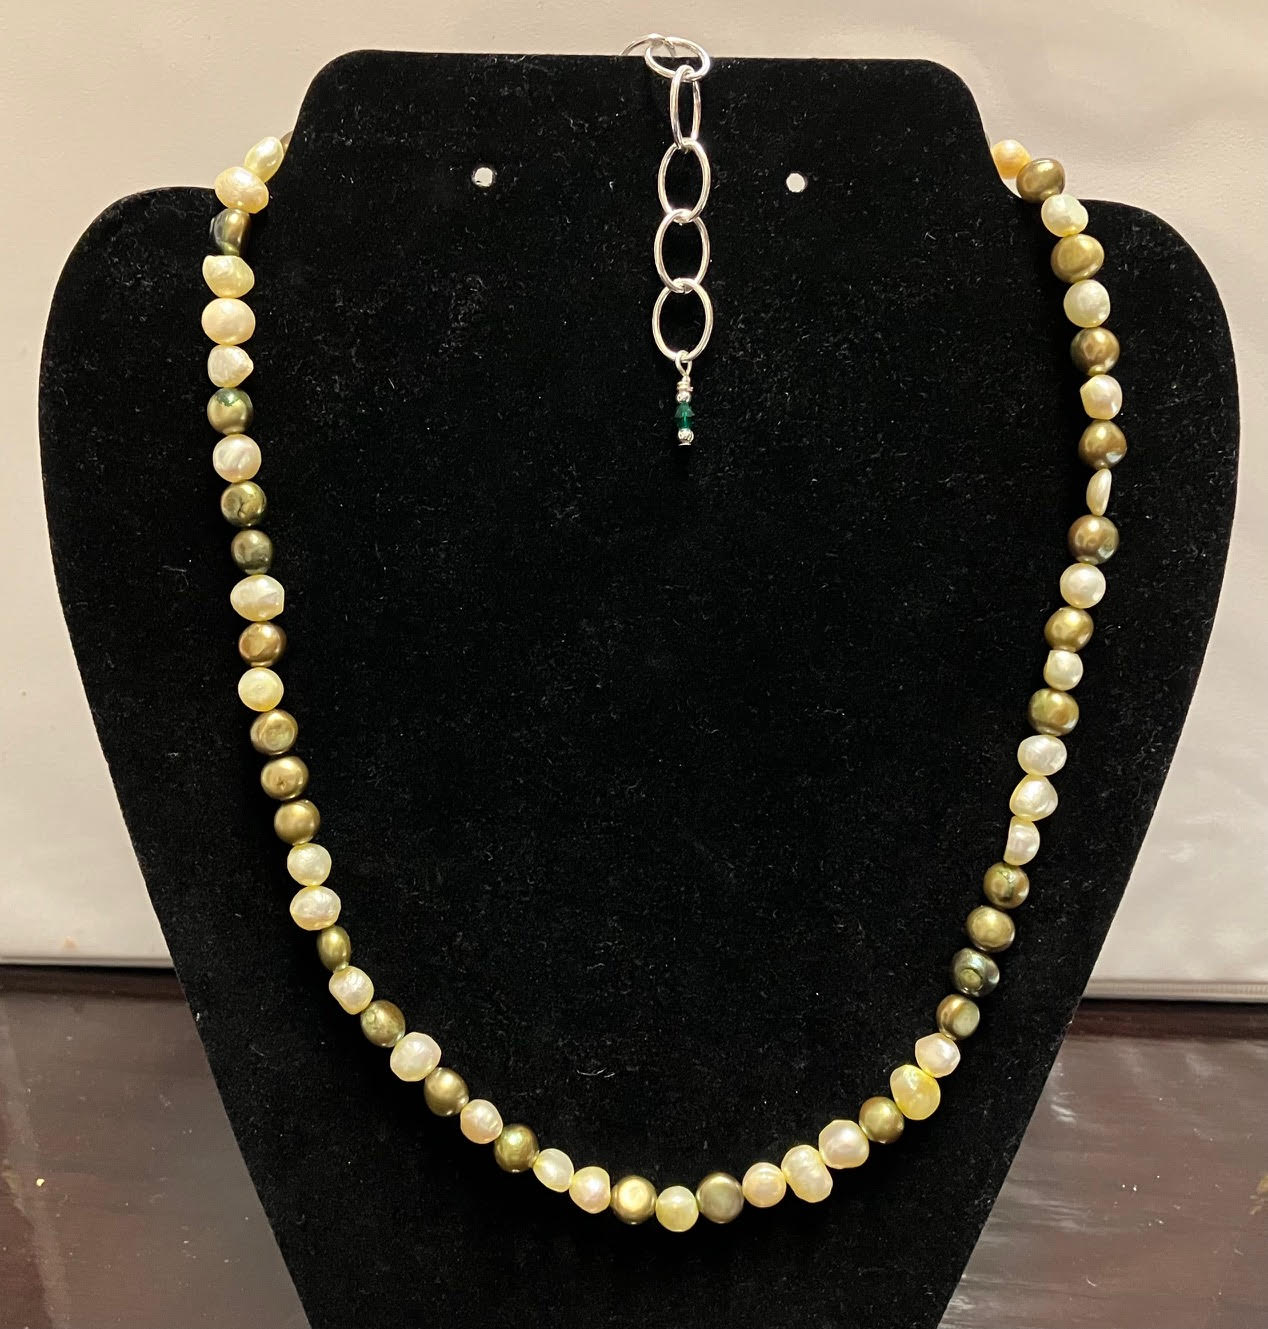 Freshwater Pearl Soup Necklaces